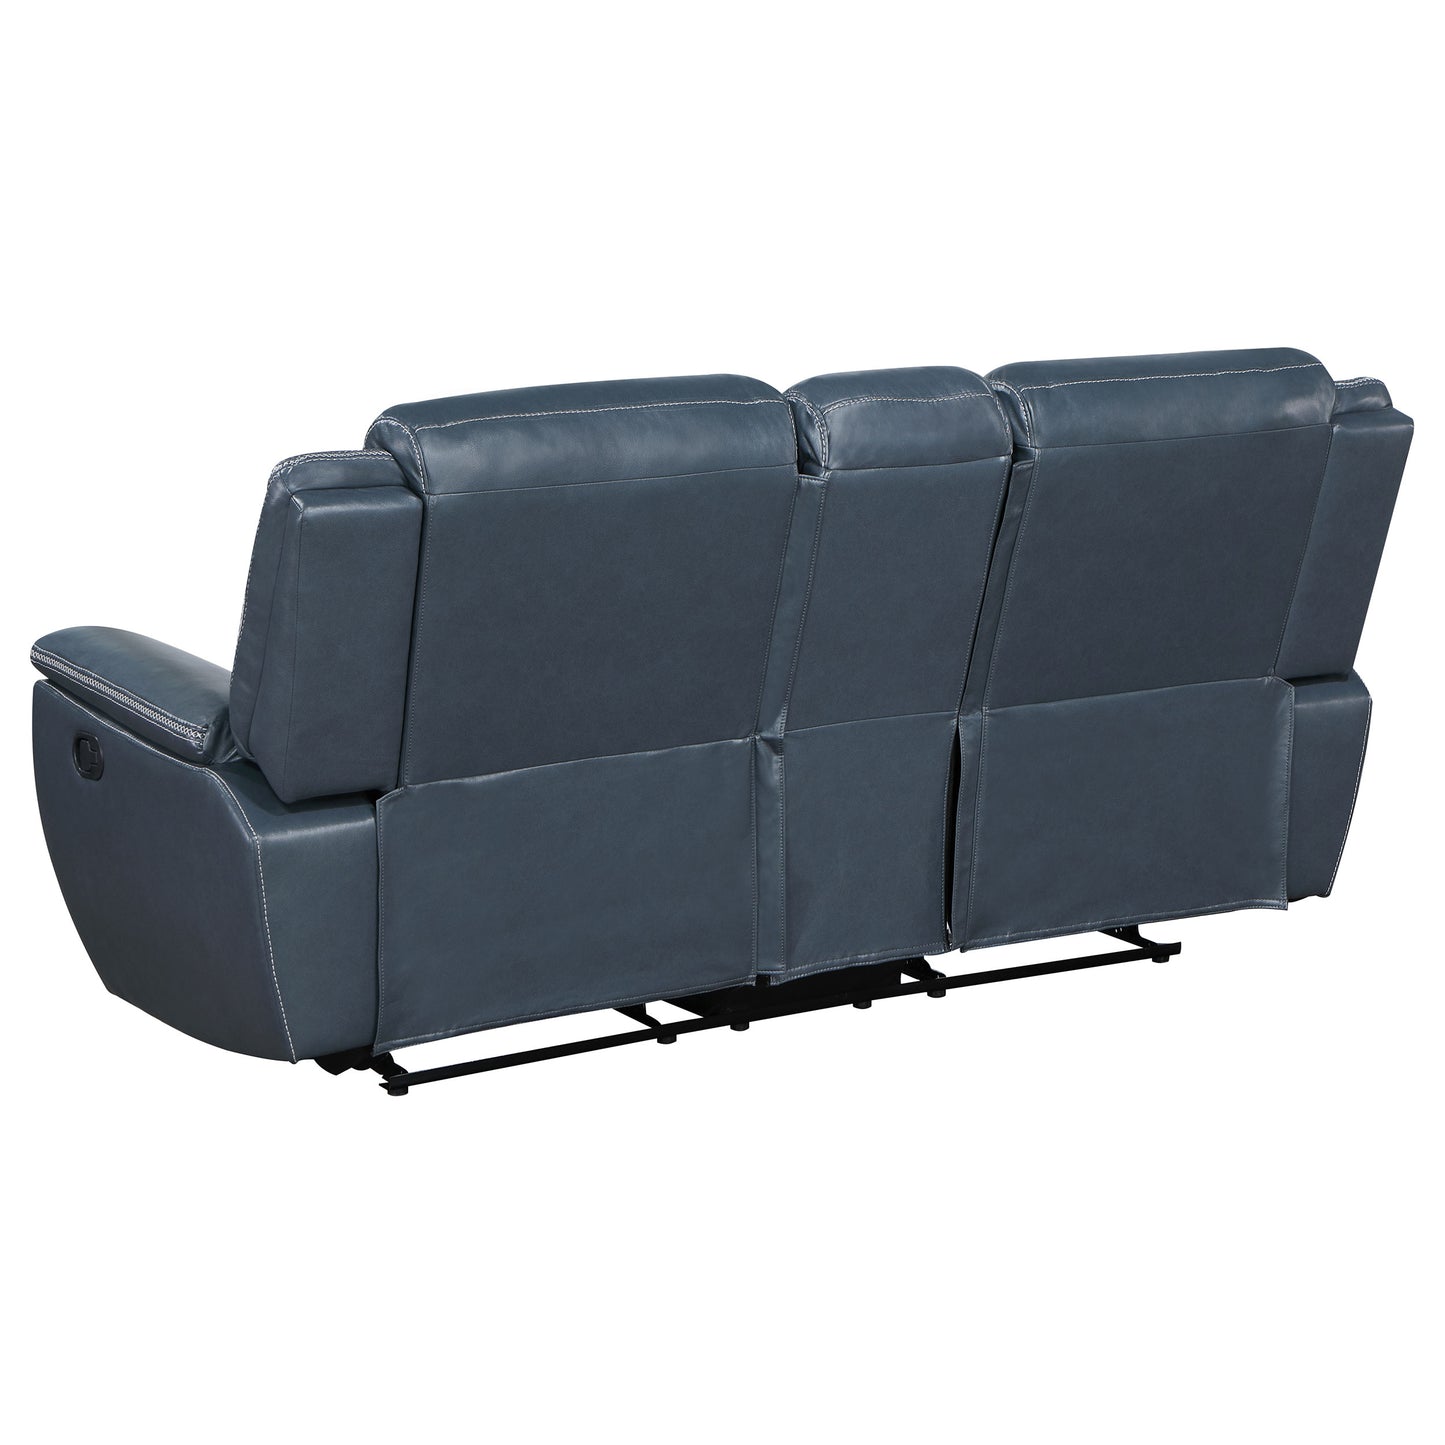 Sloane Upholstered Motion Reclining Loveseat with Console Blue